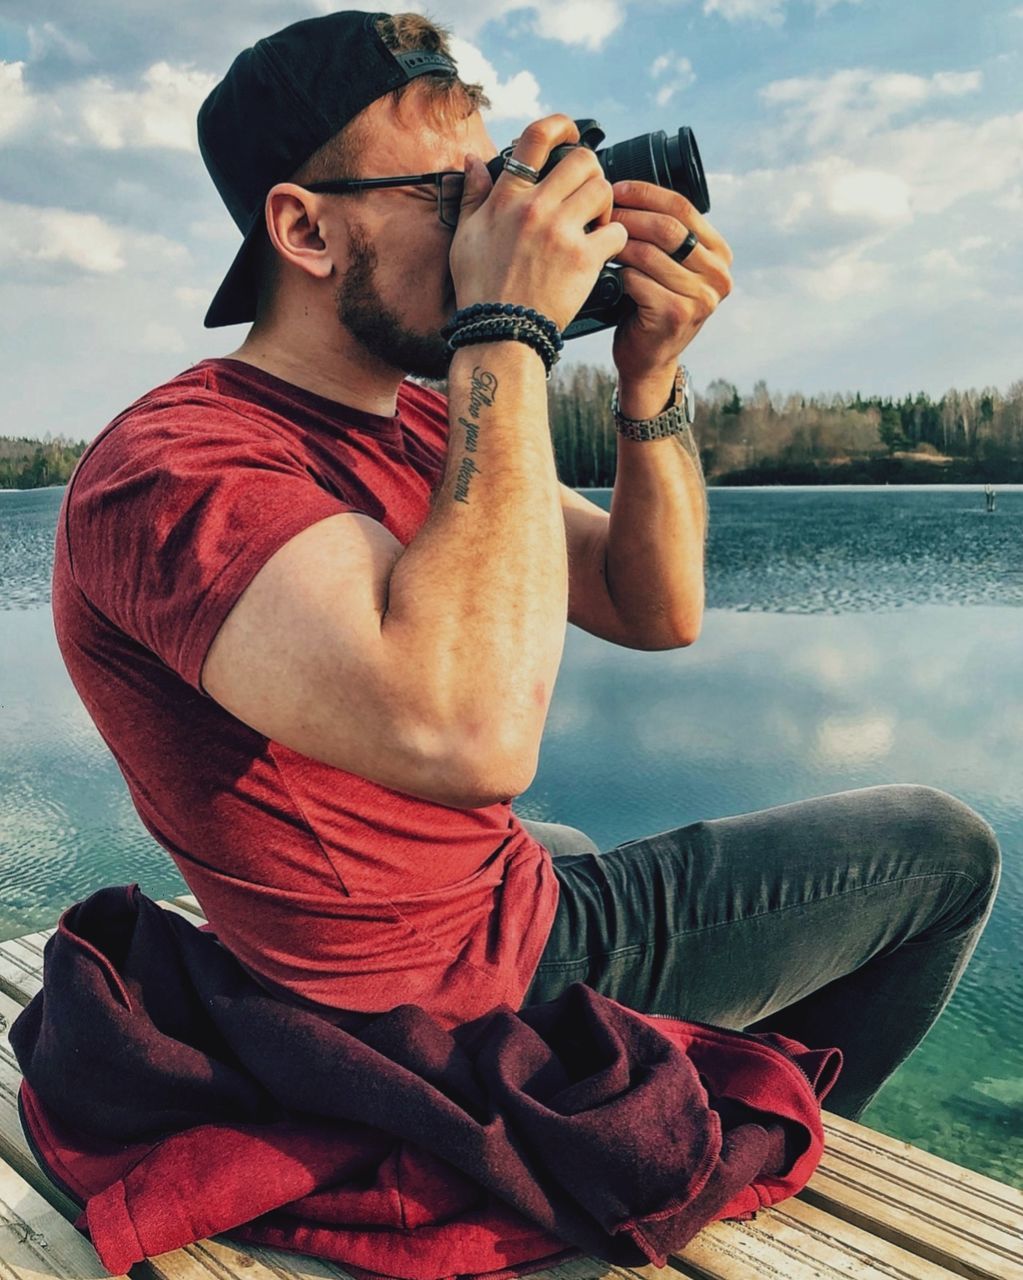 water, real people, one person, young men, leisure activity, lake, young adult, lifestyles, sitting, casual clothing, nature, holding, day, sky, men, glasses, outdoors, drinking